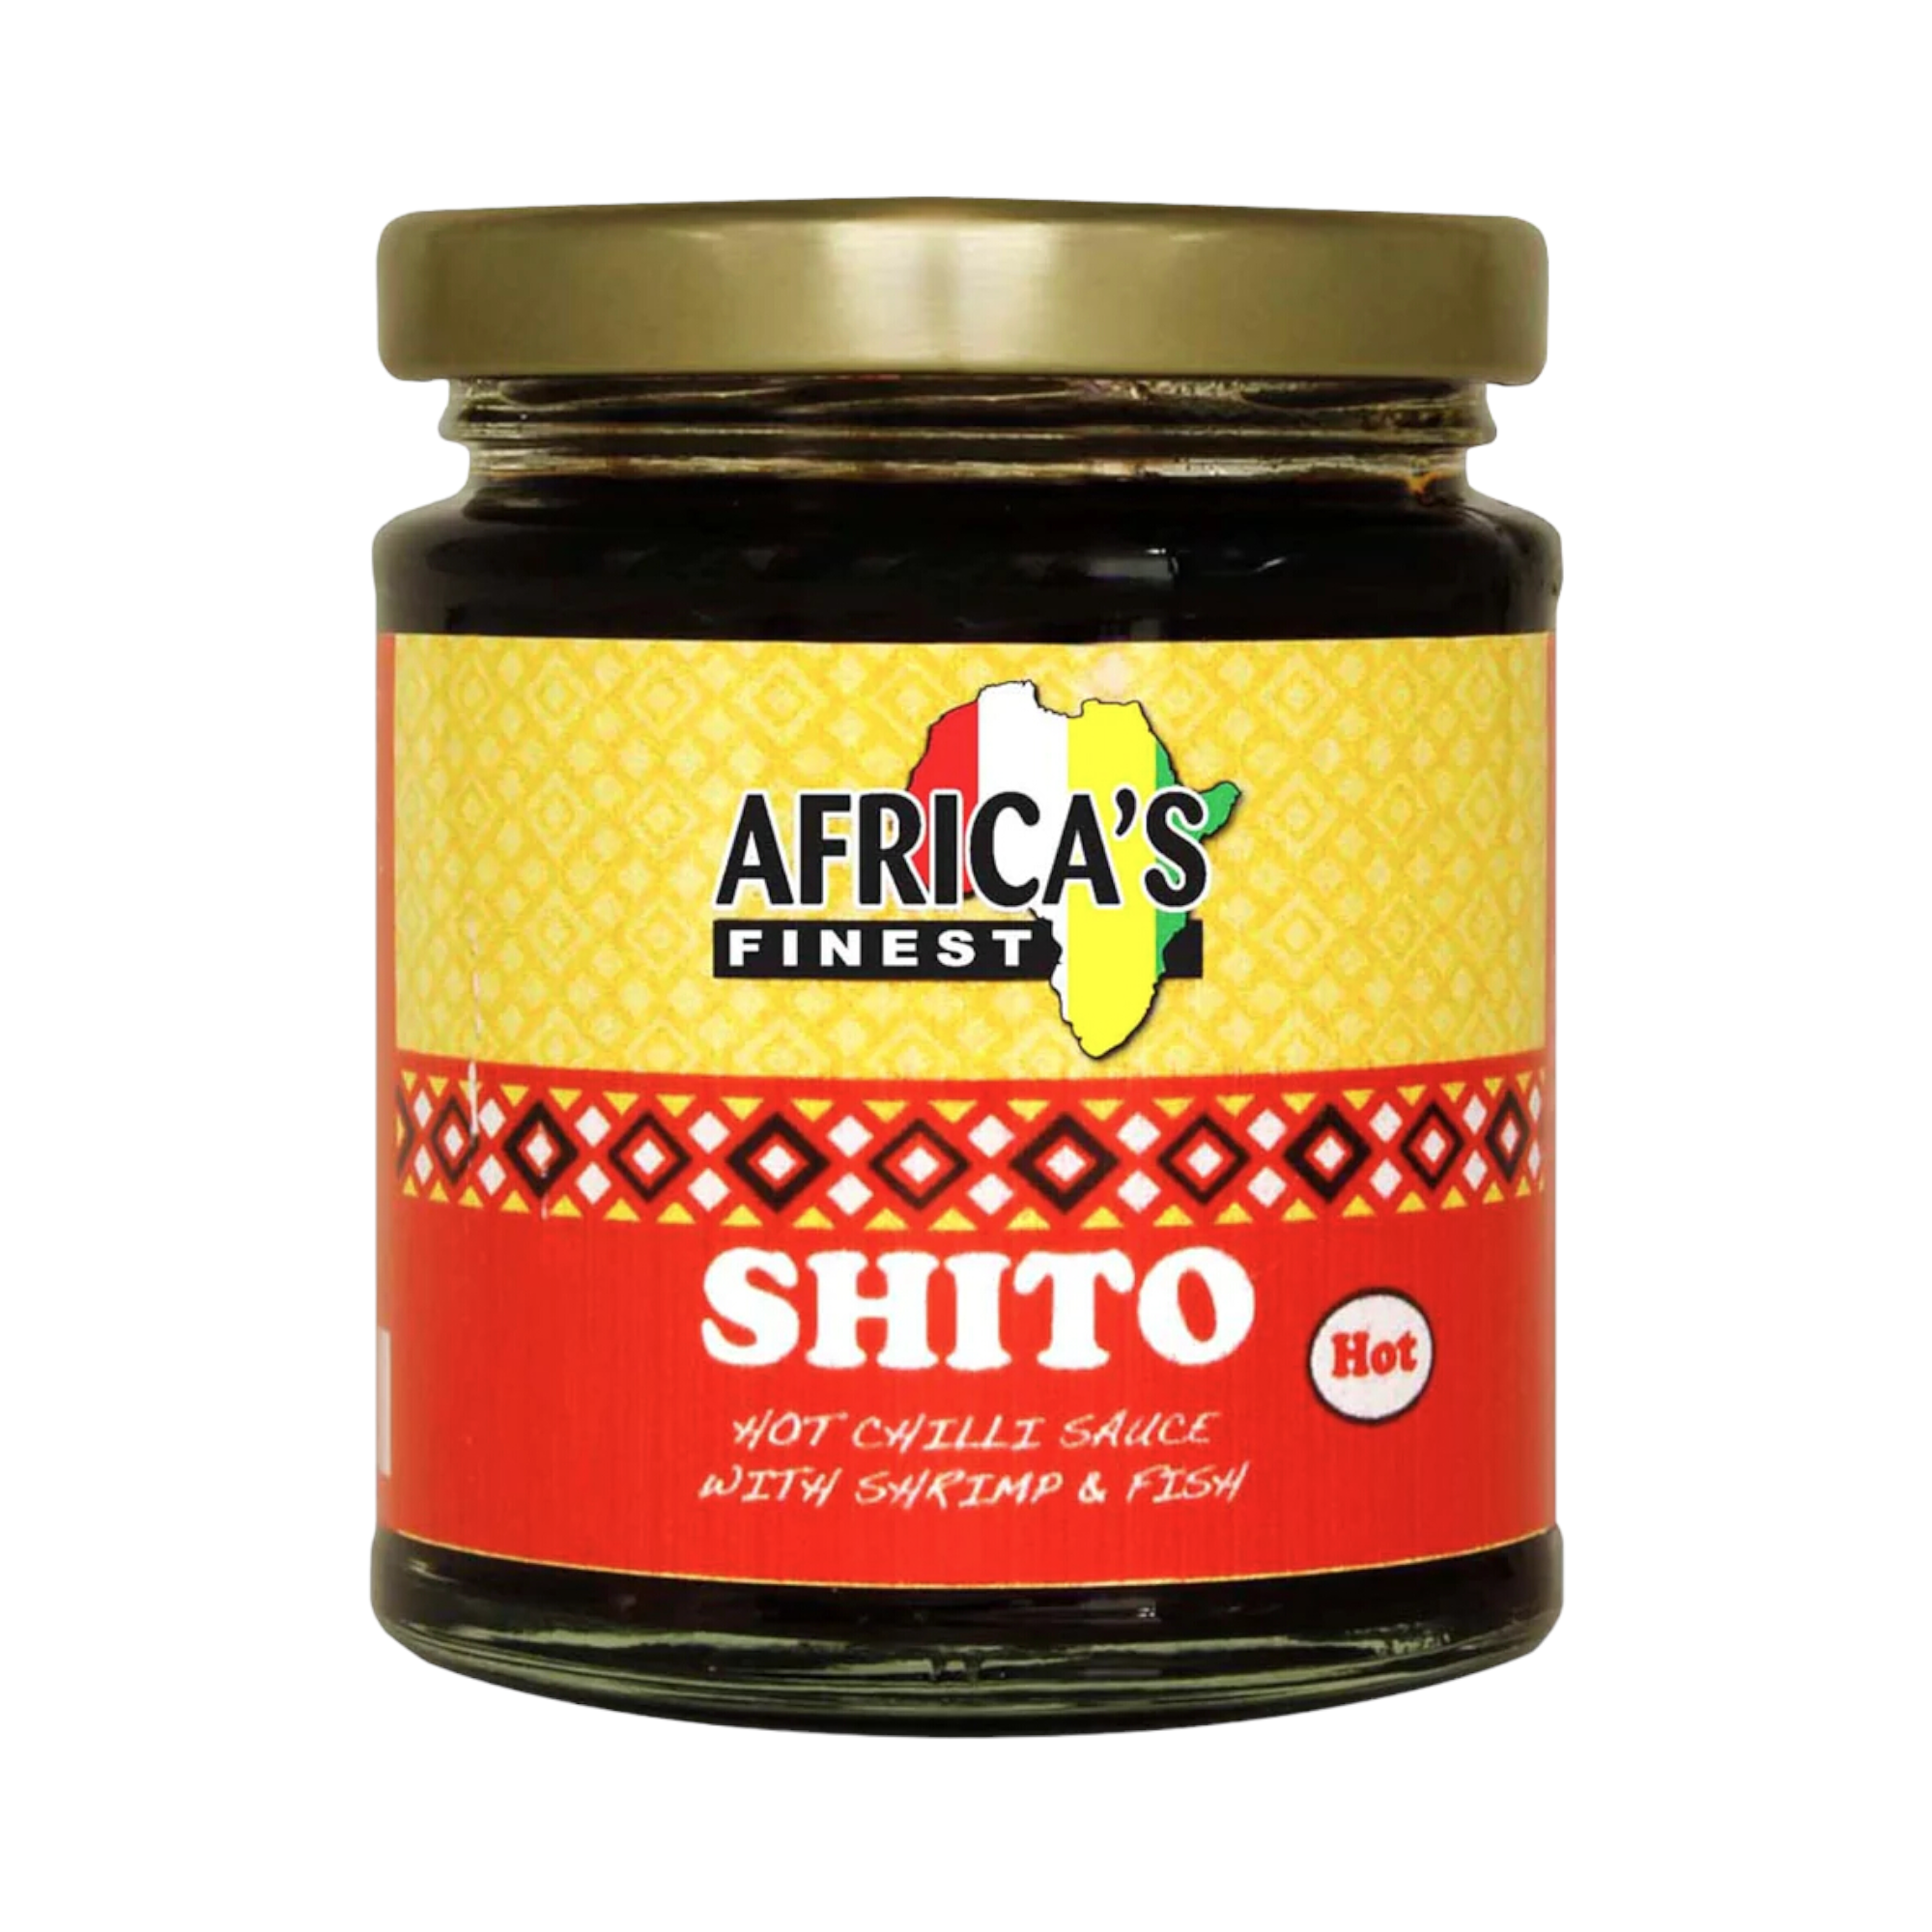 Africa’s finest hot shito – 160ml